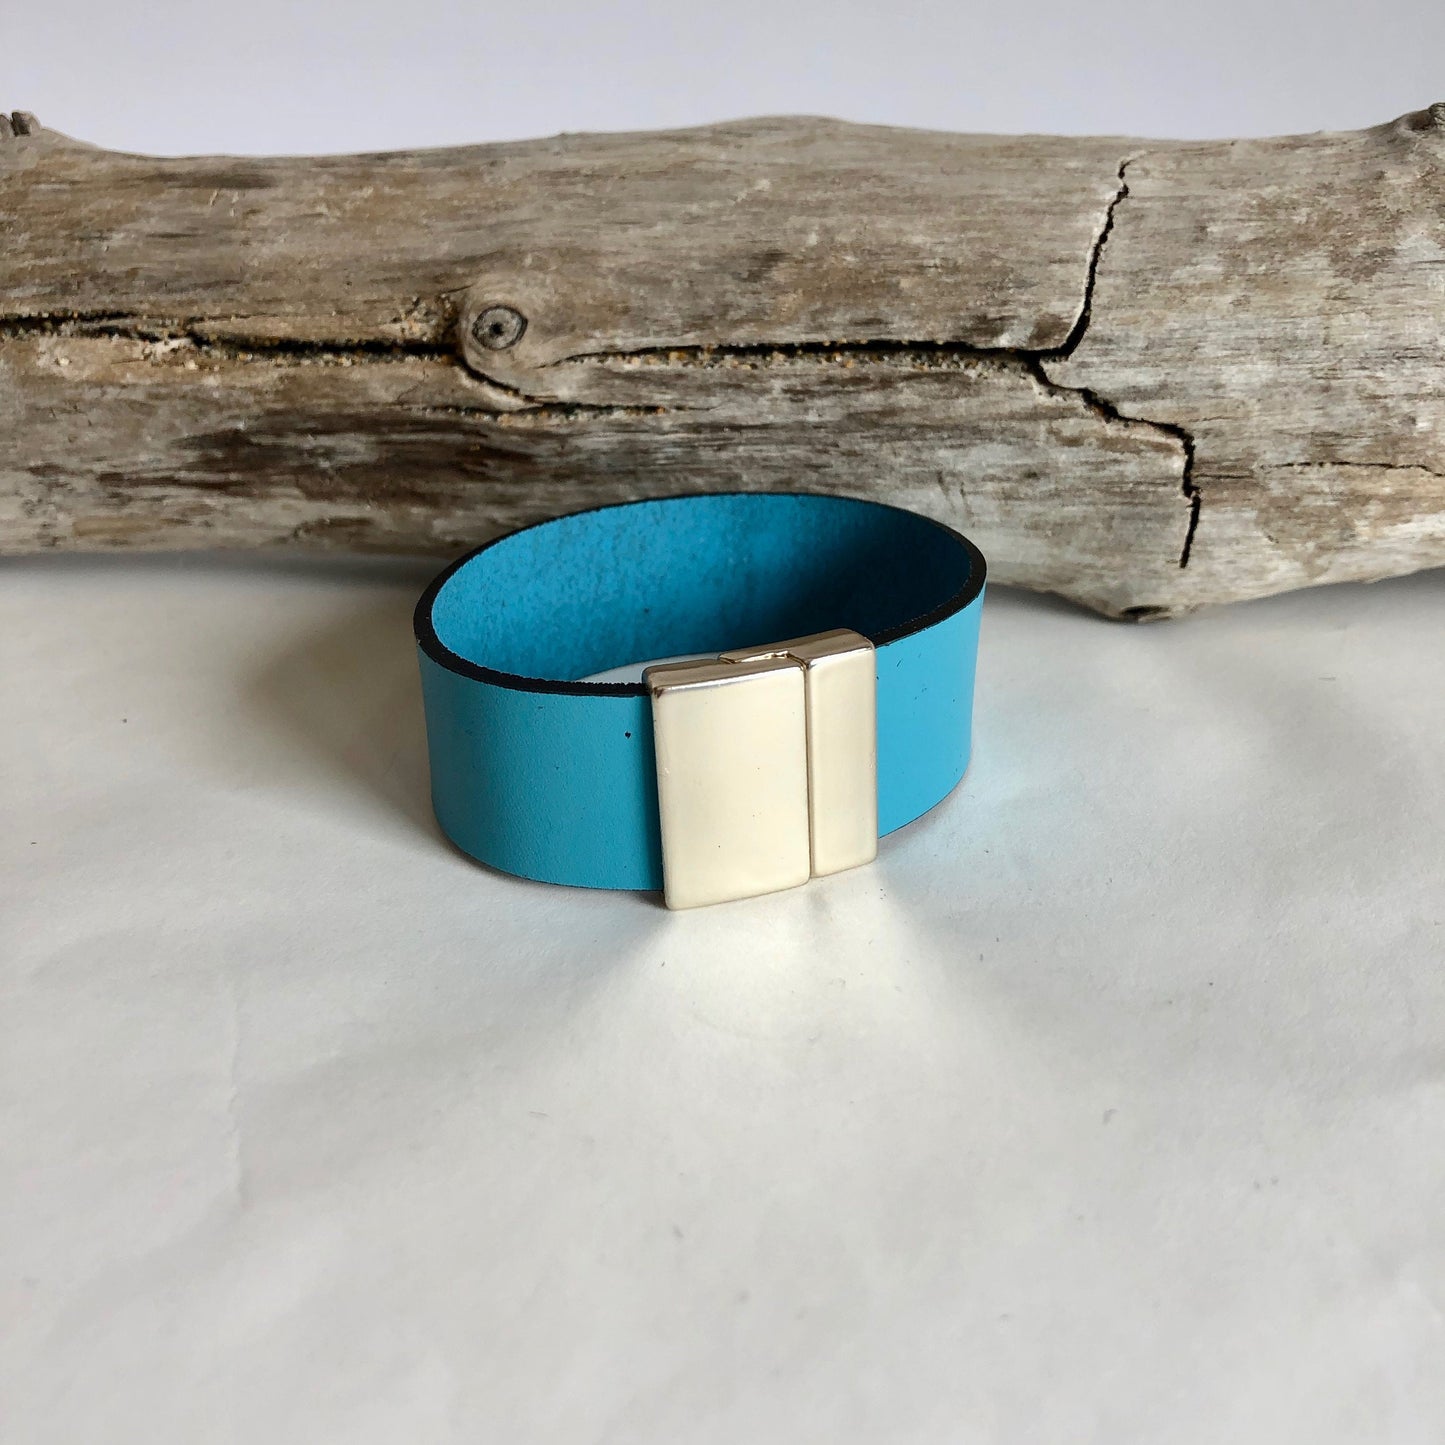 Leather bracelet, made with beautiful turquoise Italian leather, and finished with a quality silver magnetic clasp.